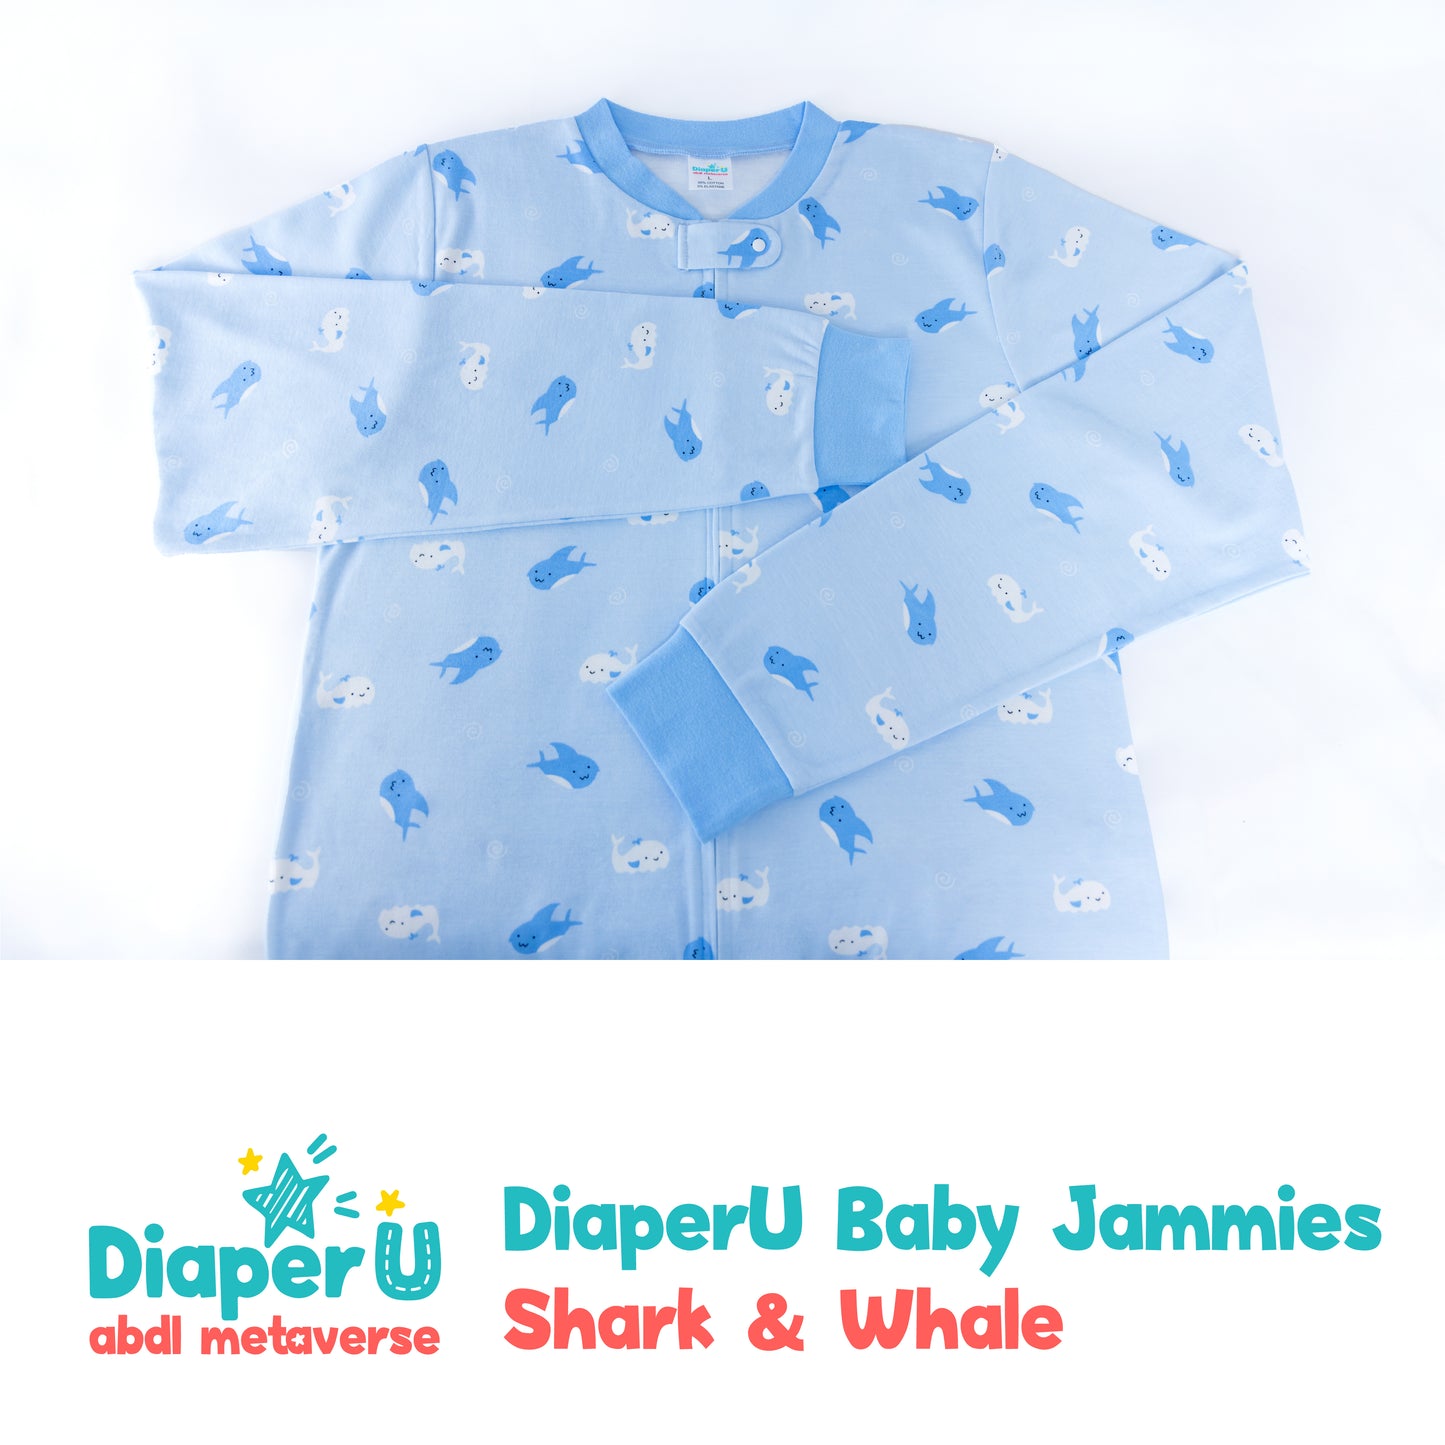 ABDL Footed Jammies - Shark & Whale